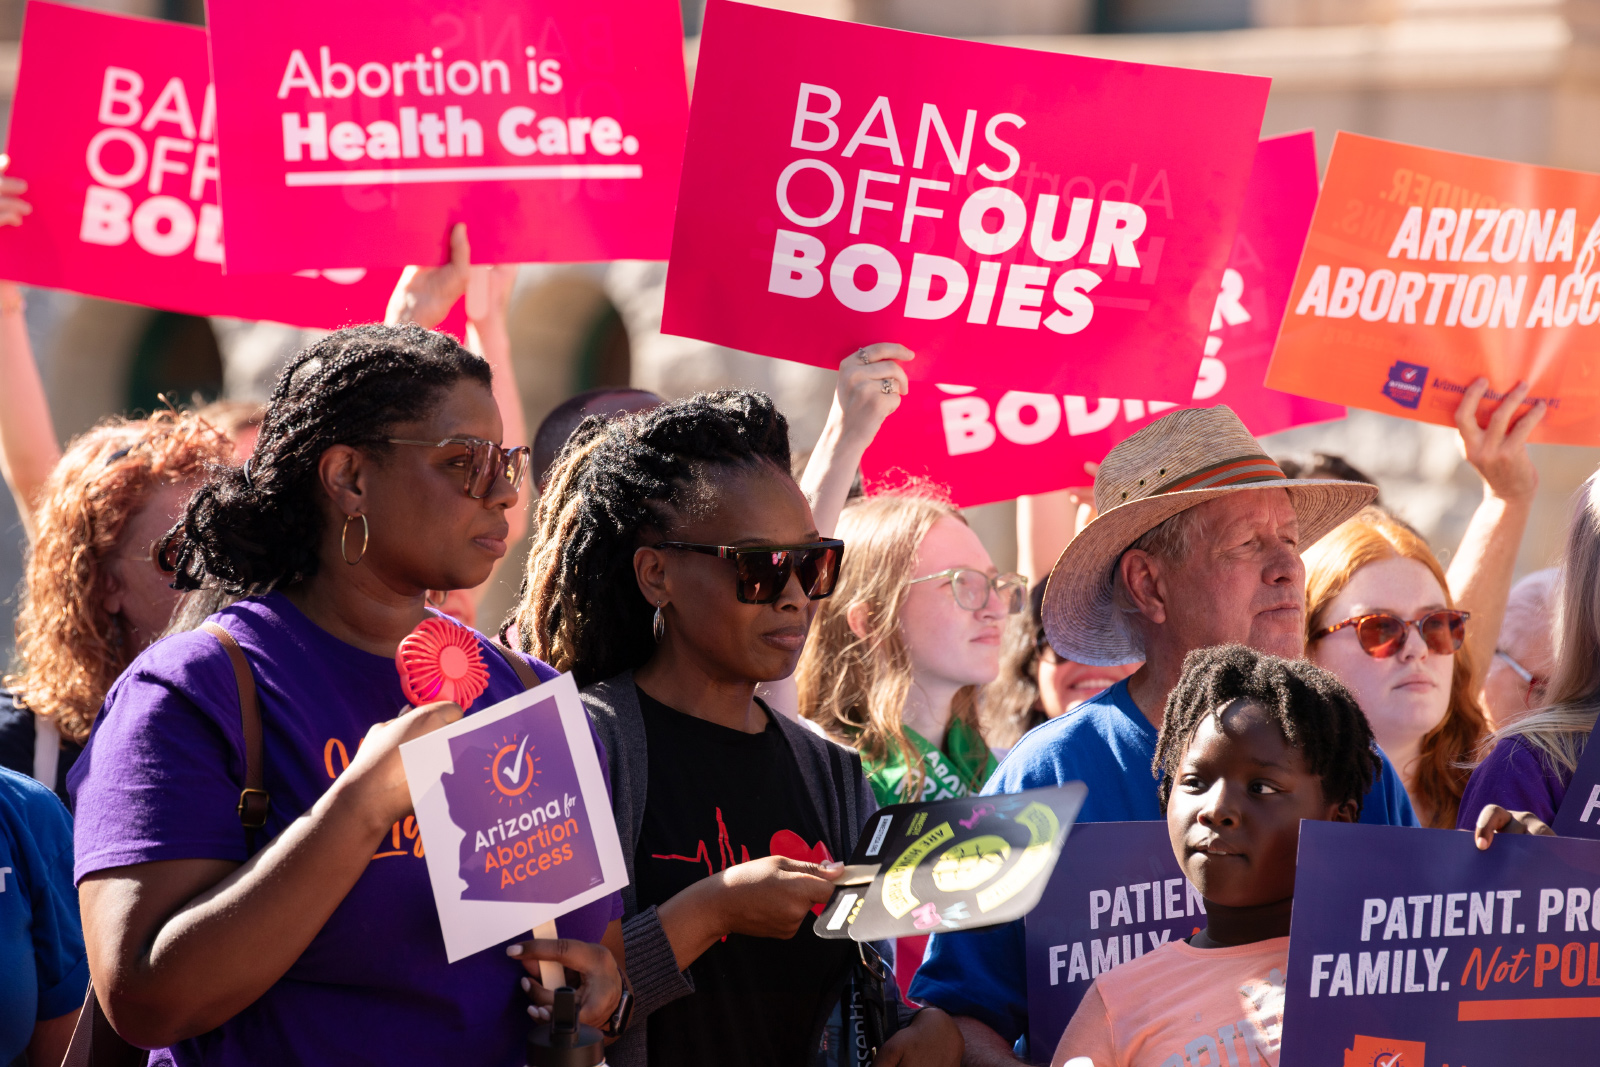 Extremists will never quit trying to outlaw abortion, and Arizona voters know it